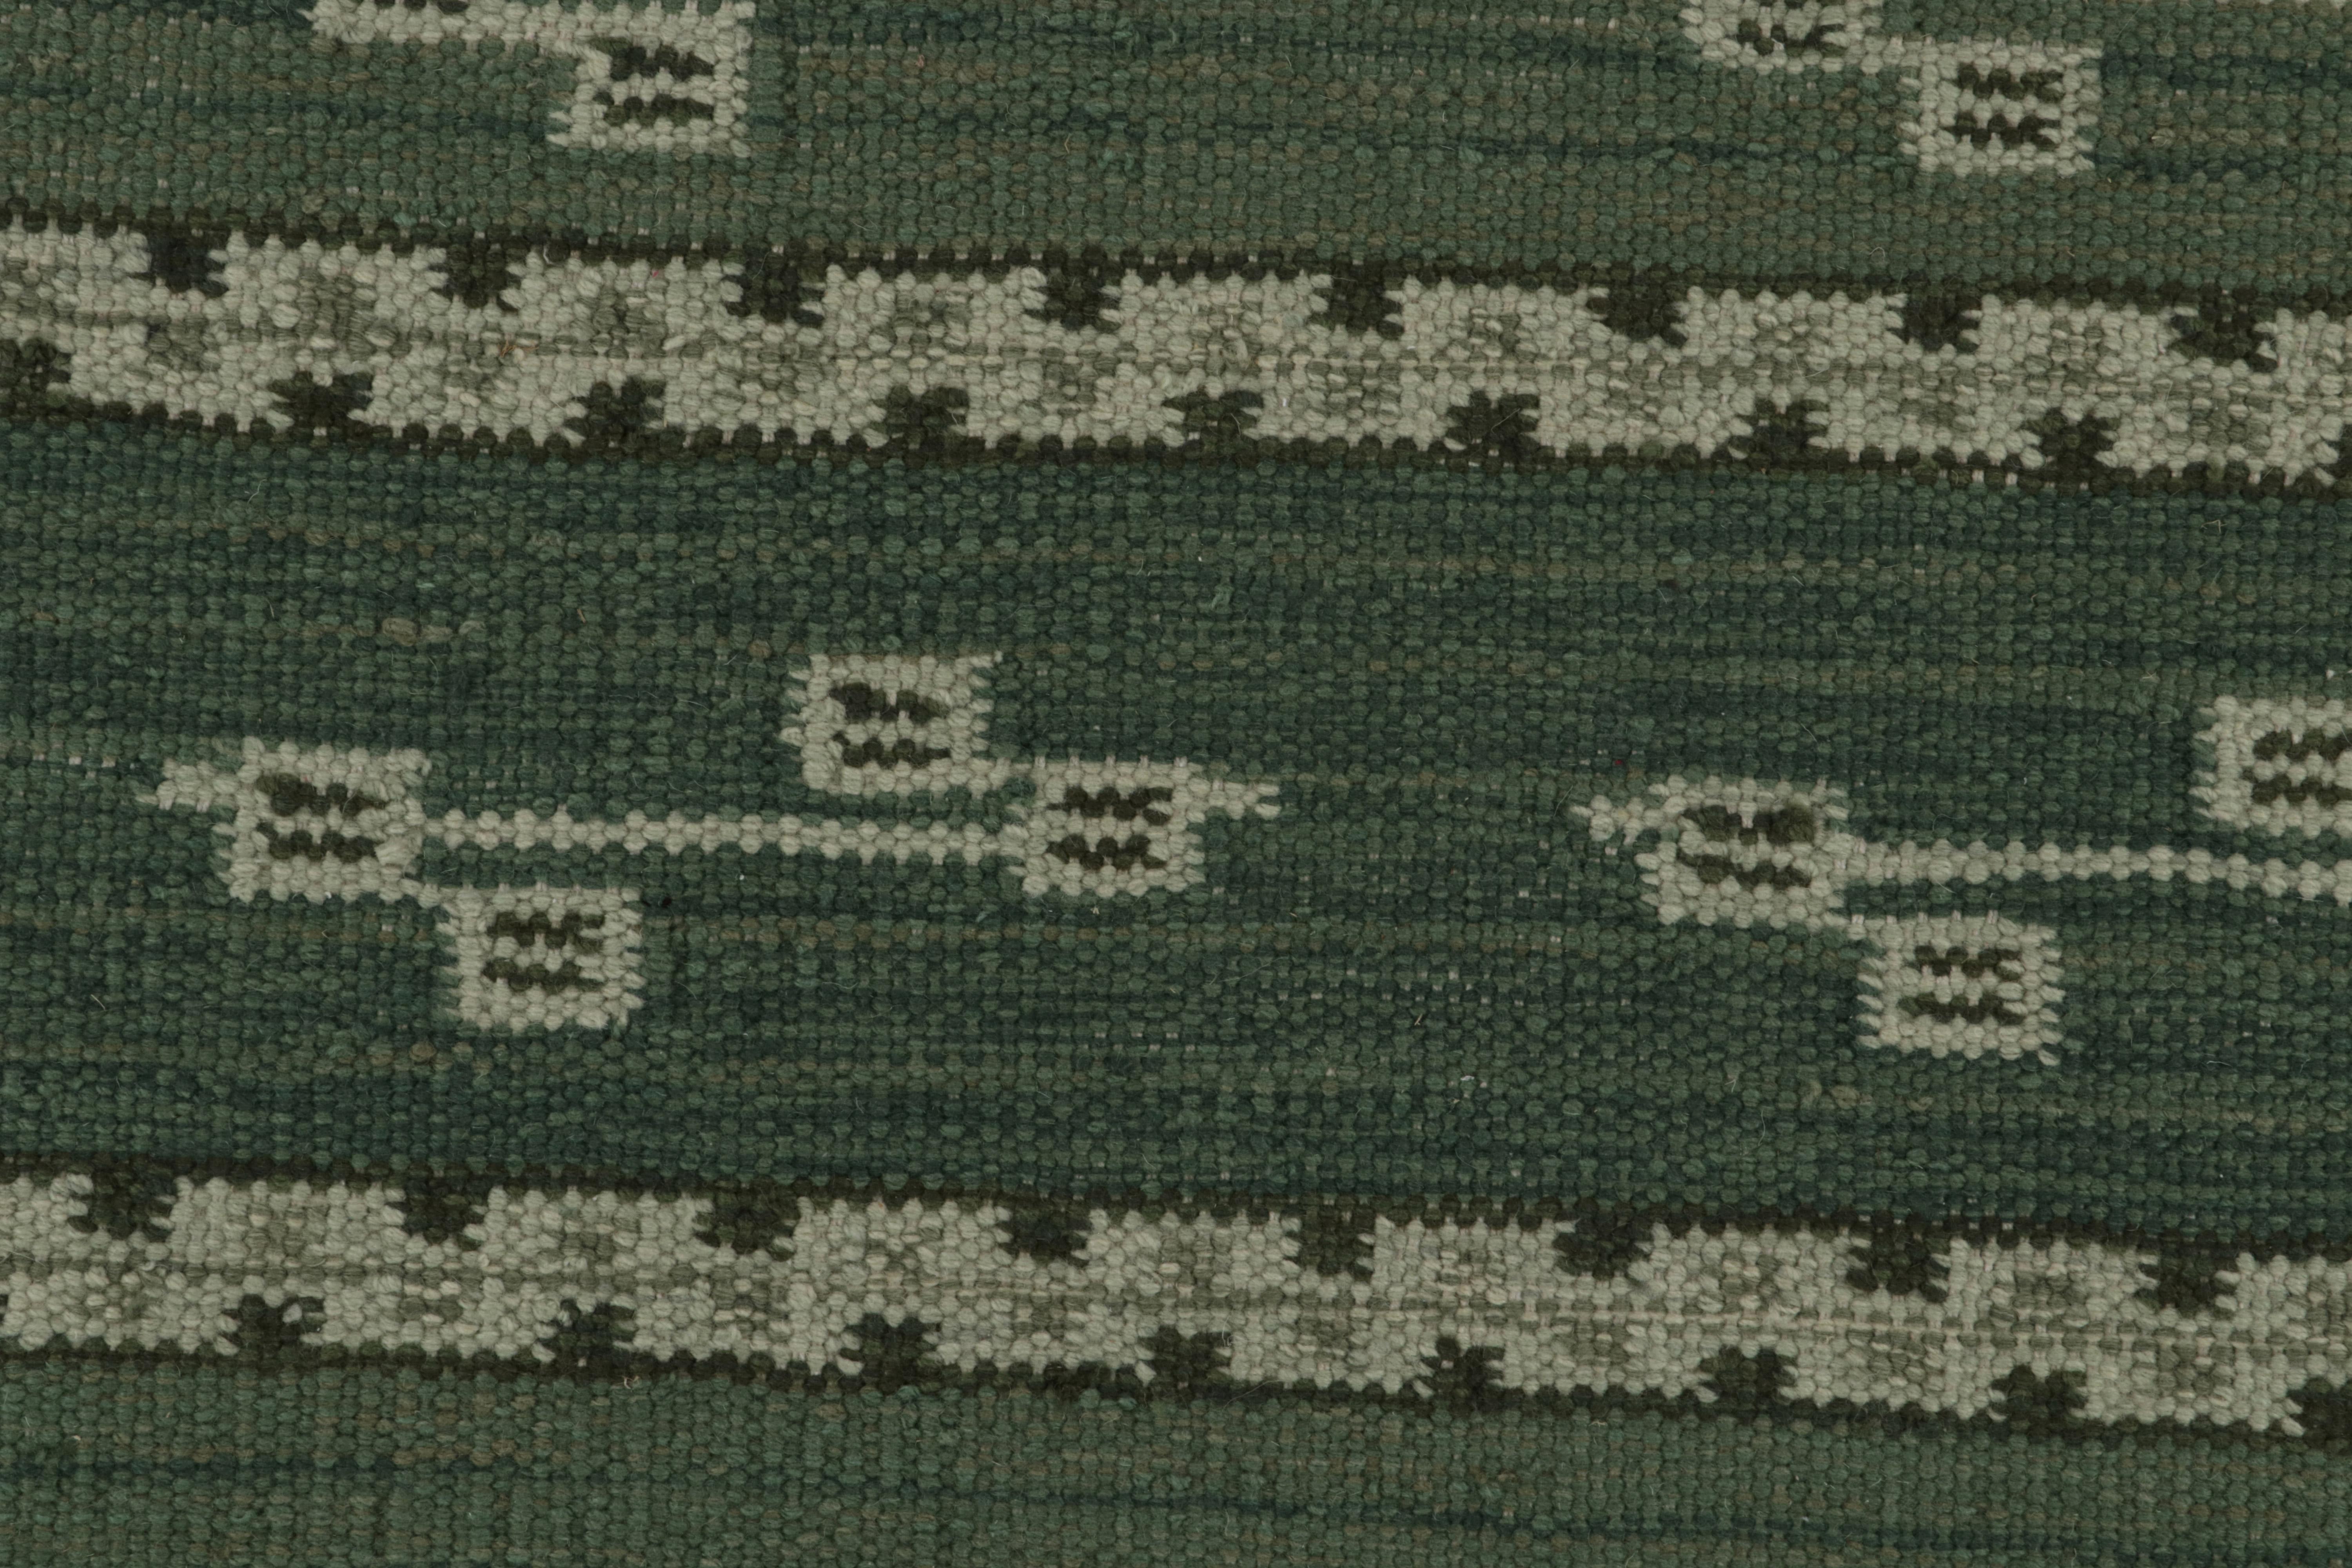 Indian Rug & Kilim’s Scandinavian Style Kilim Rug in Green with Geometric Patterns For Sale